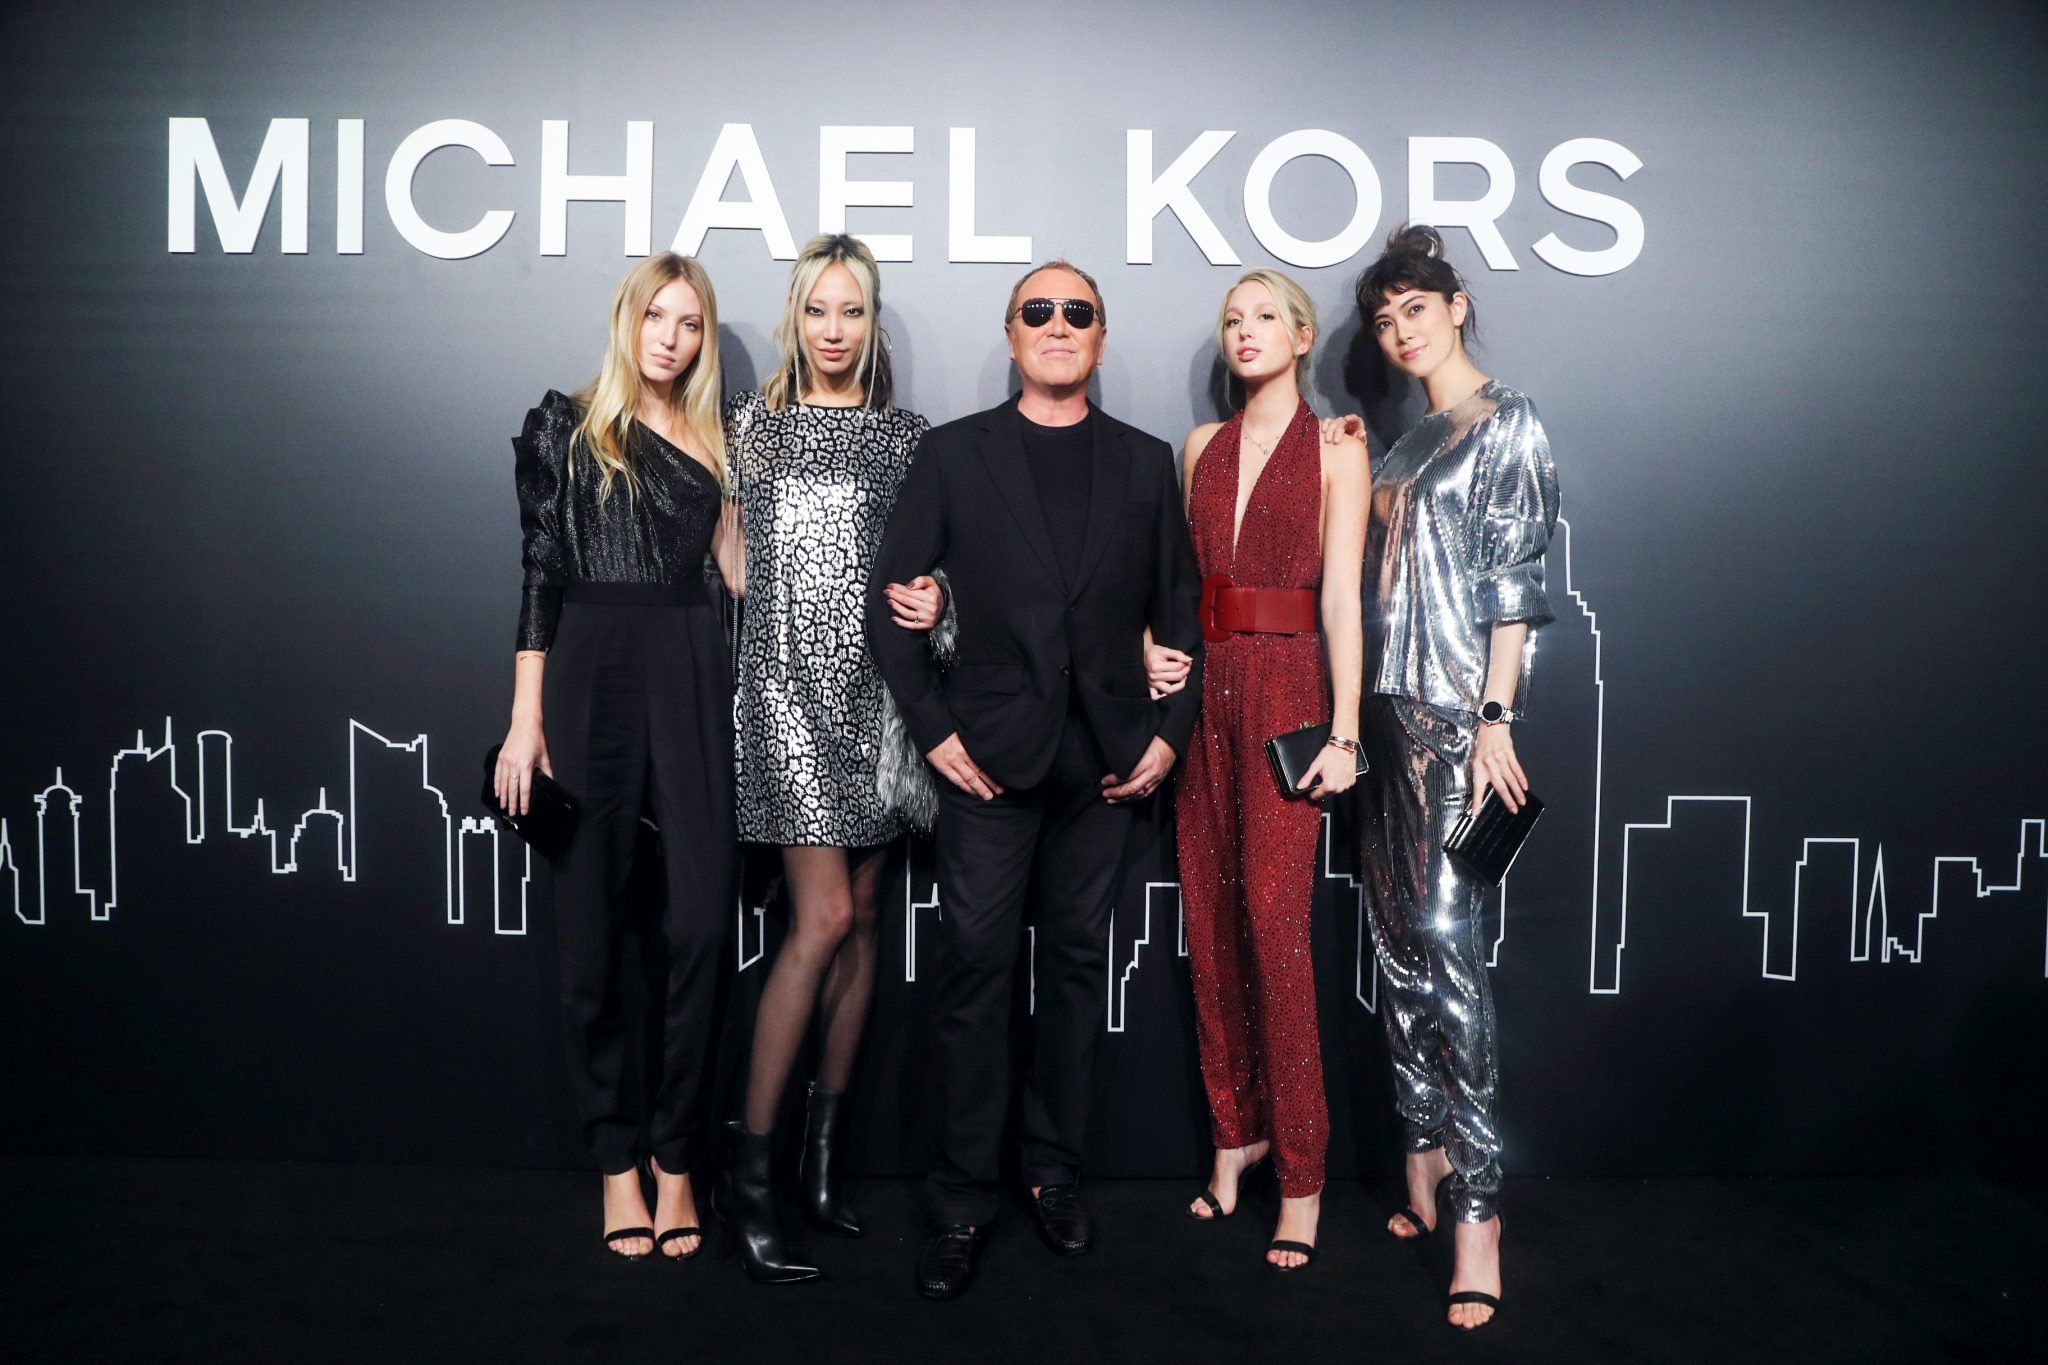 Why Michael Kors’ Shanghai Party is a Killer Digital Marketing Campaign